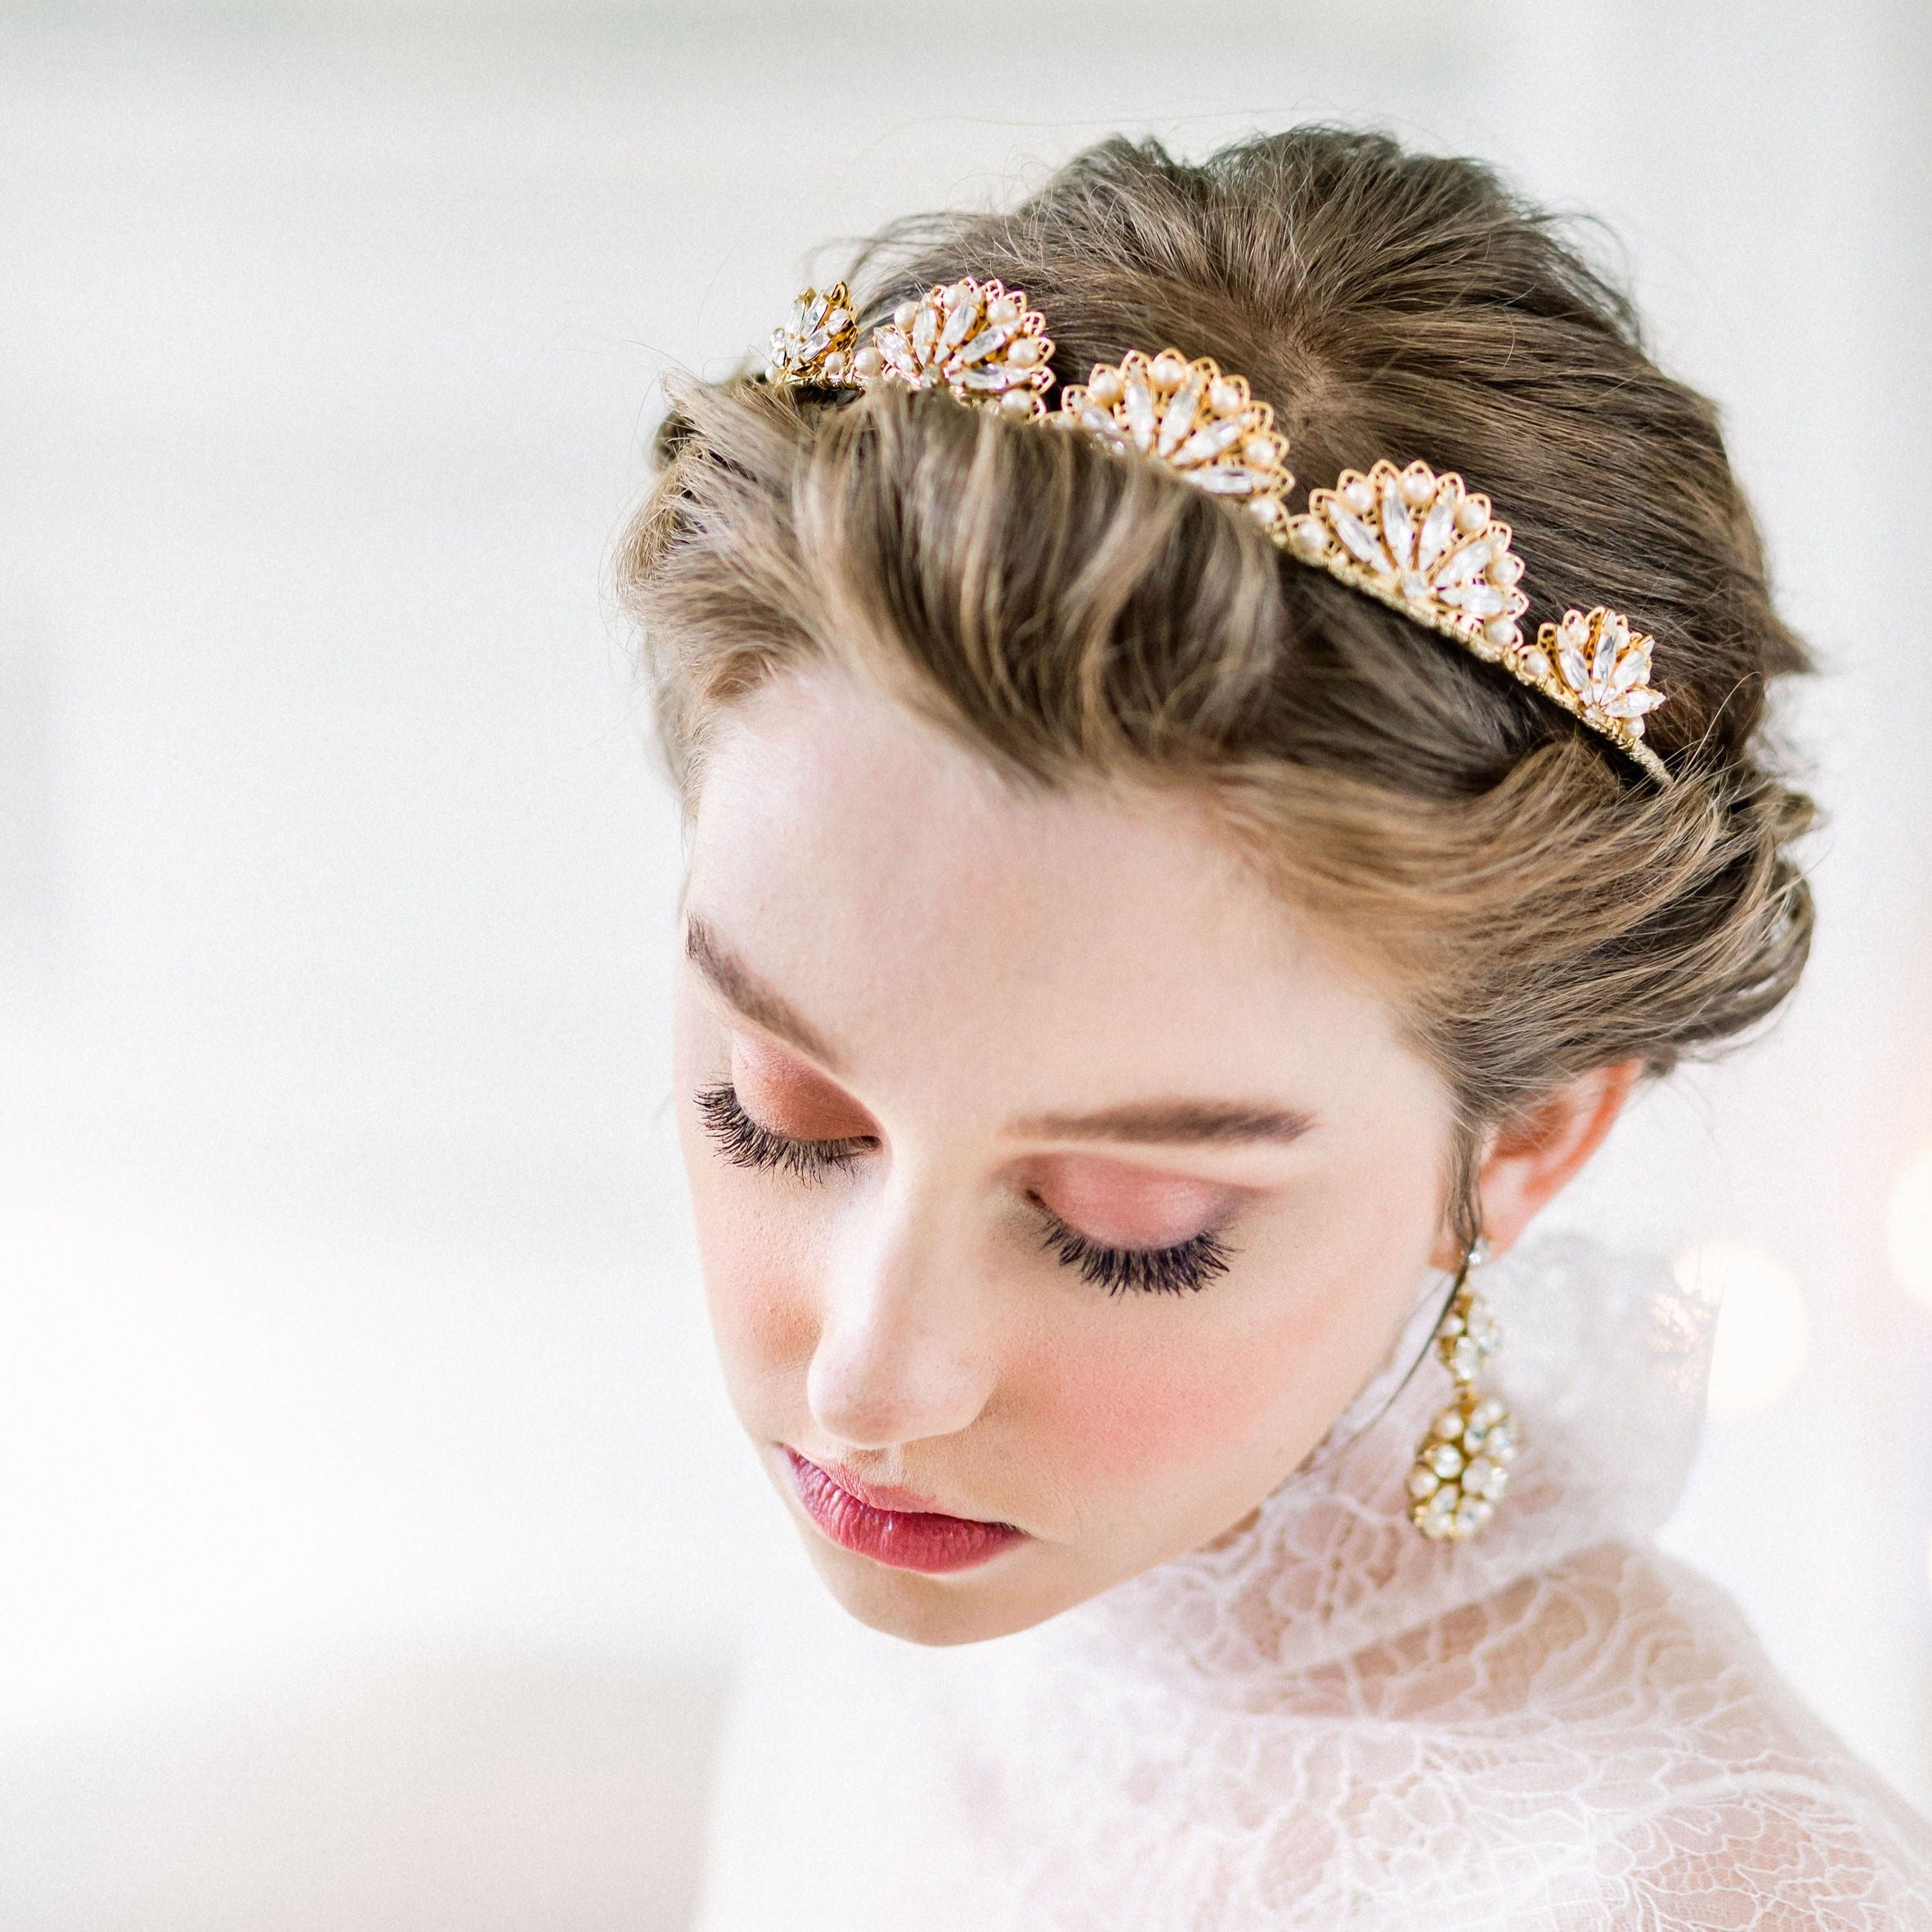 How to choose the right bridal hair accessory – Brides & Hairpins